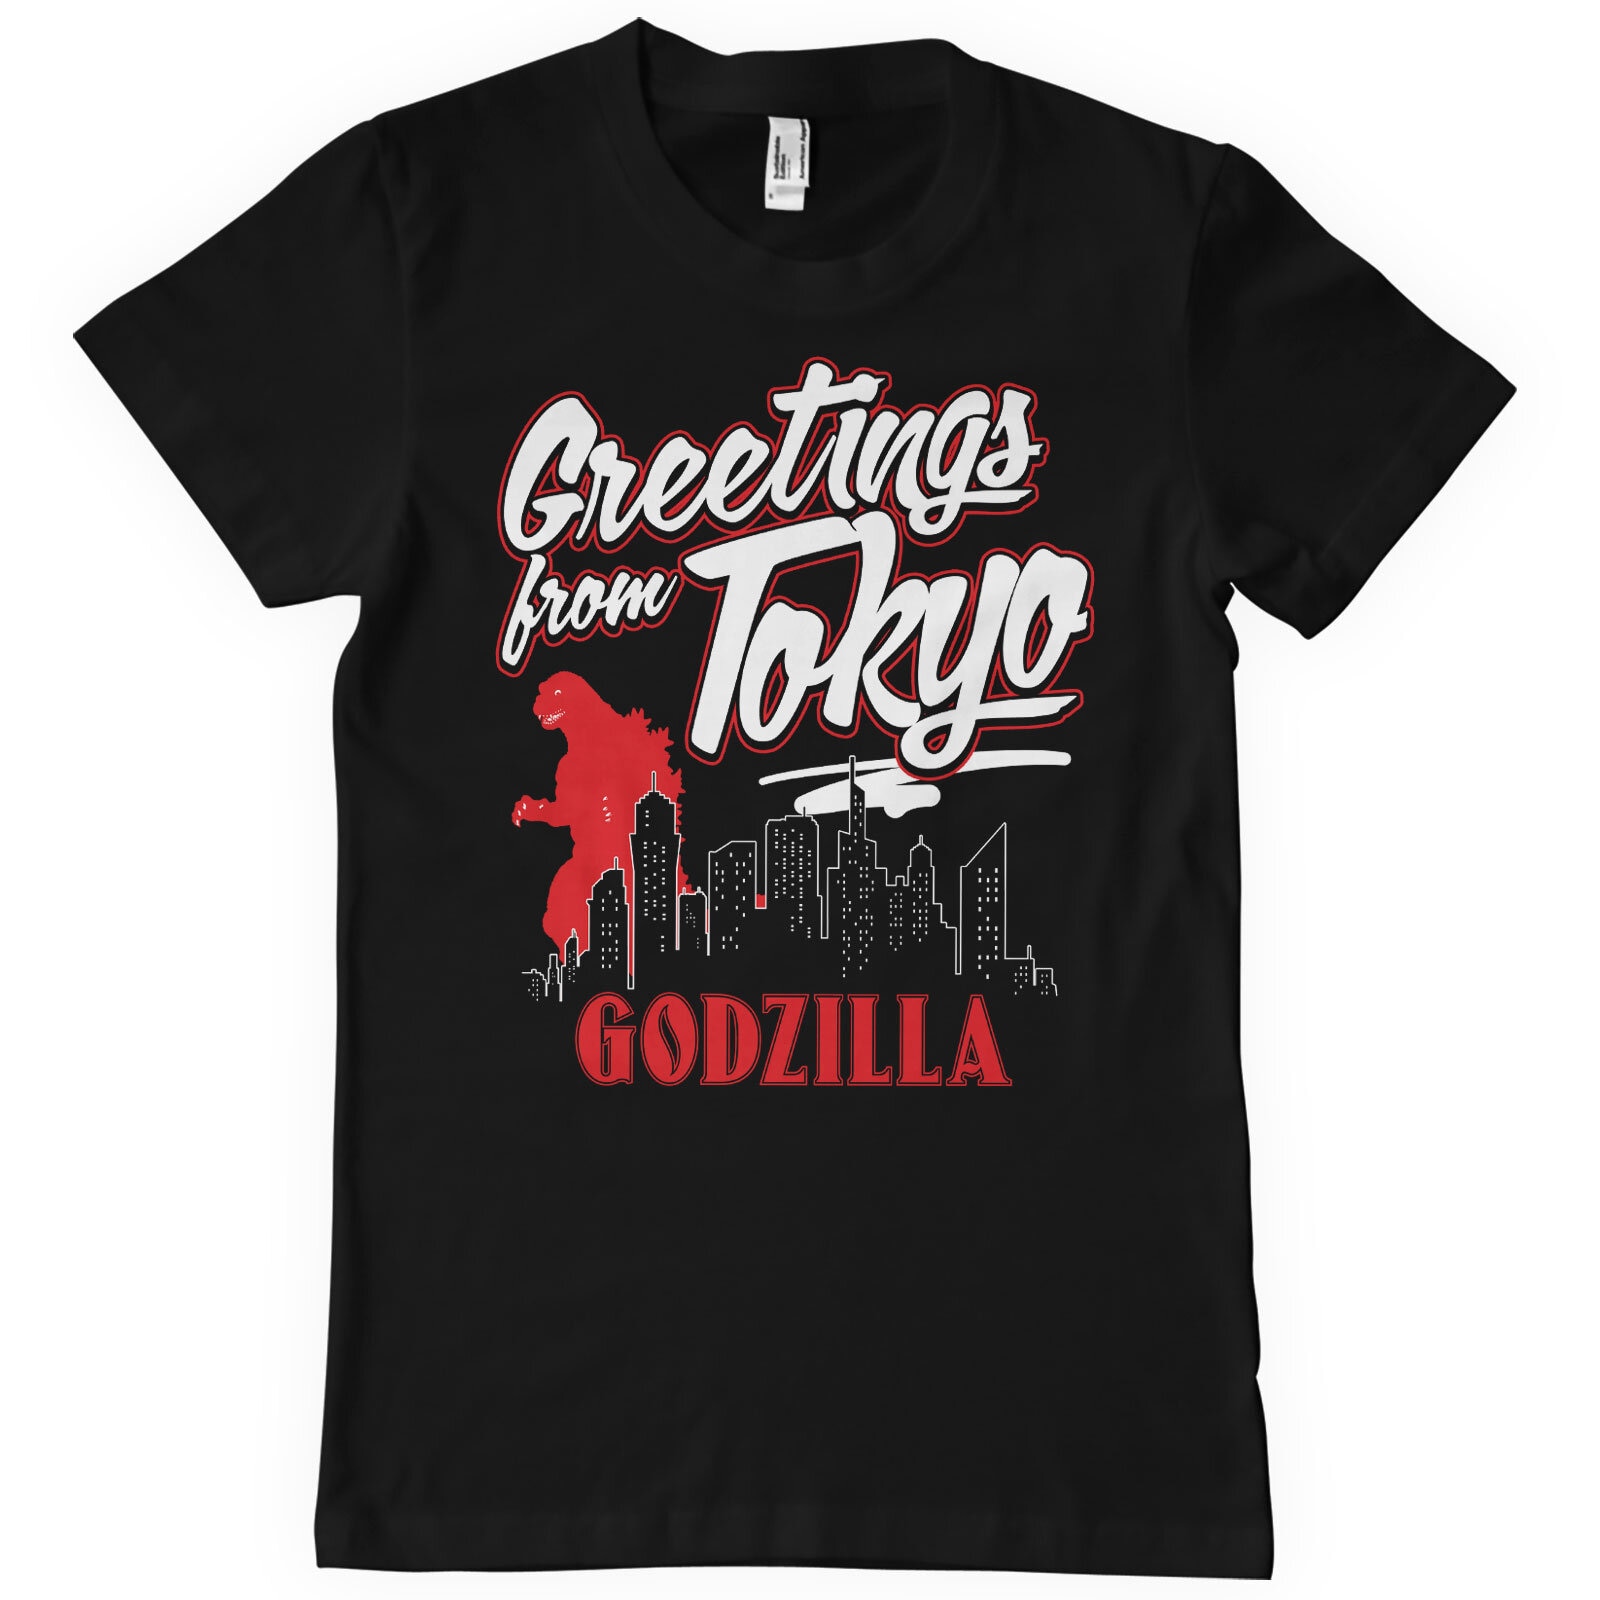 Greetings From Tokyo T-Shirt